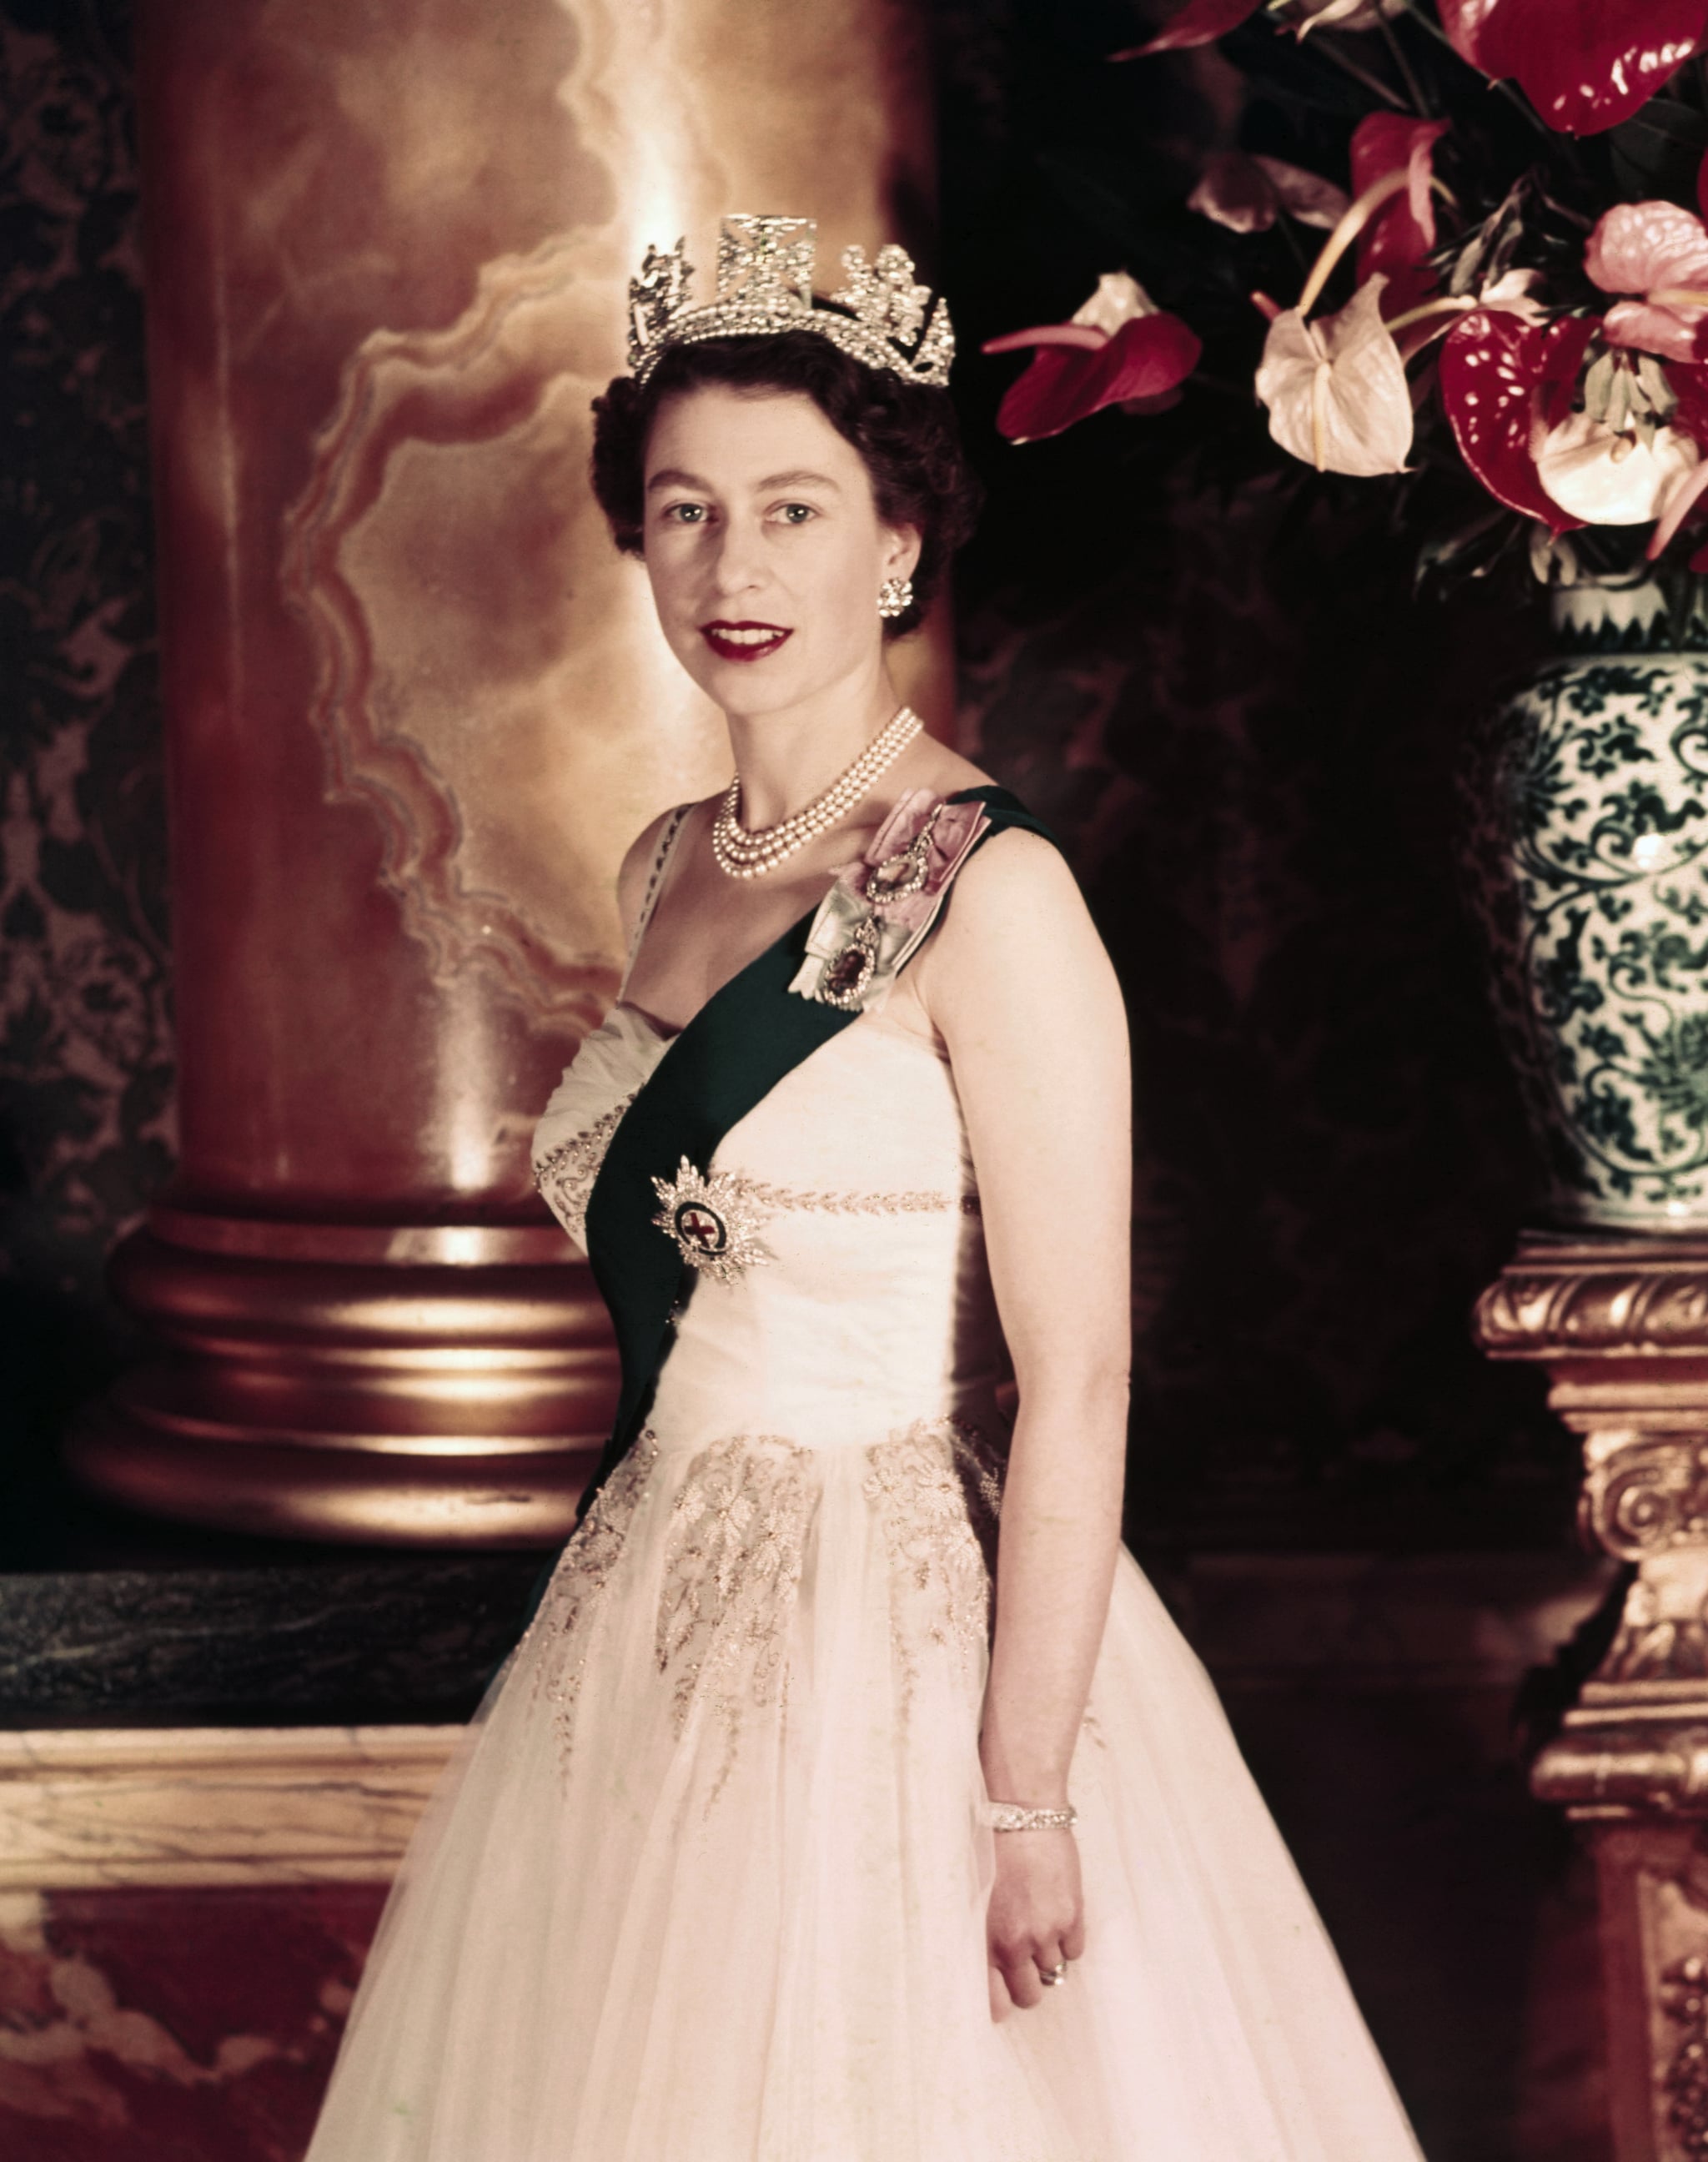 Queen Elizabeth II poses wearing a formal sash and crown in 1955